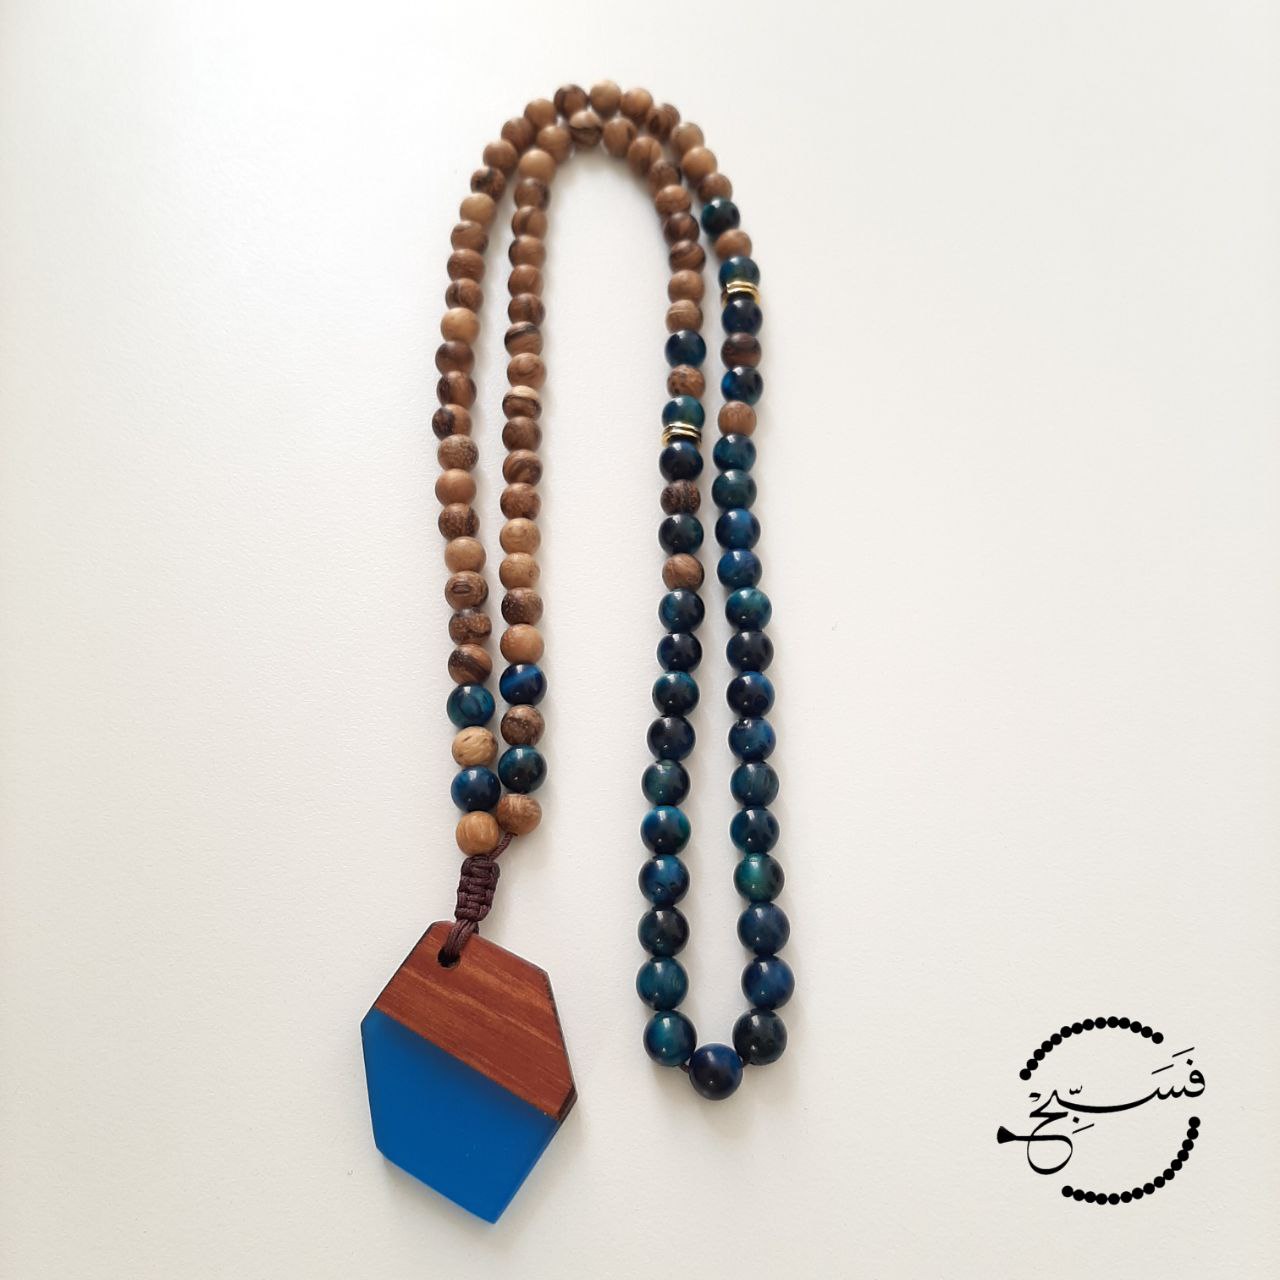 Gorgeous turquoise tiger eye beads with wood and a resin pendant.  Packaged in a luxurious pouch and a gift box.  99 beads